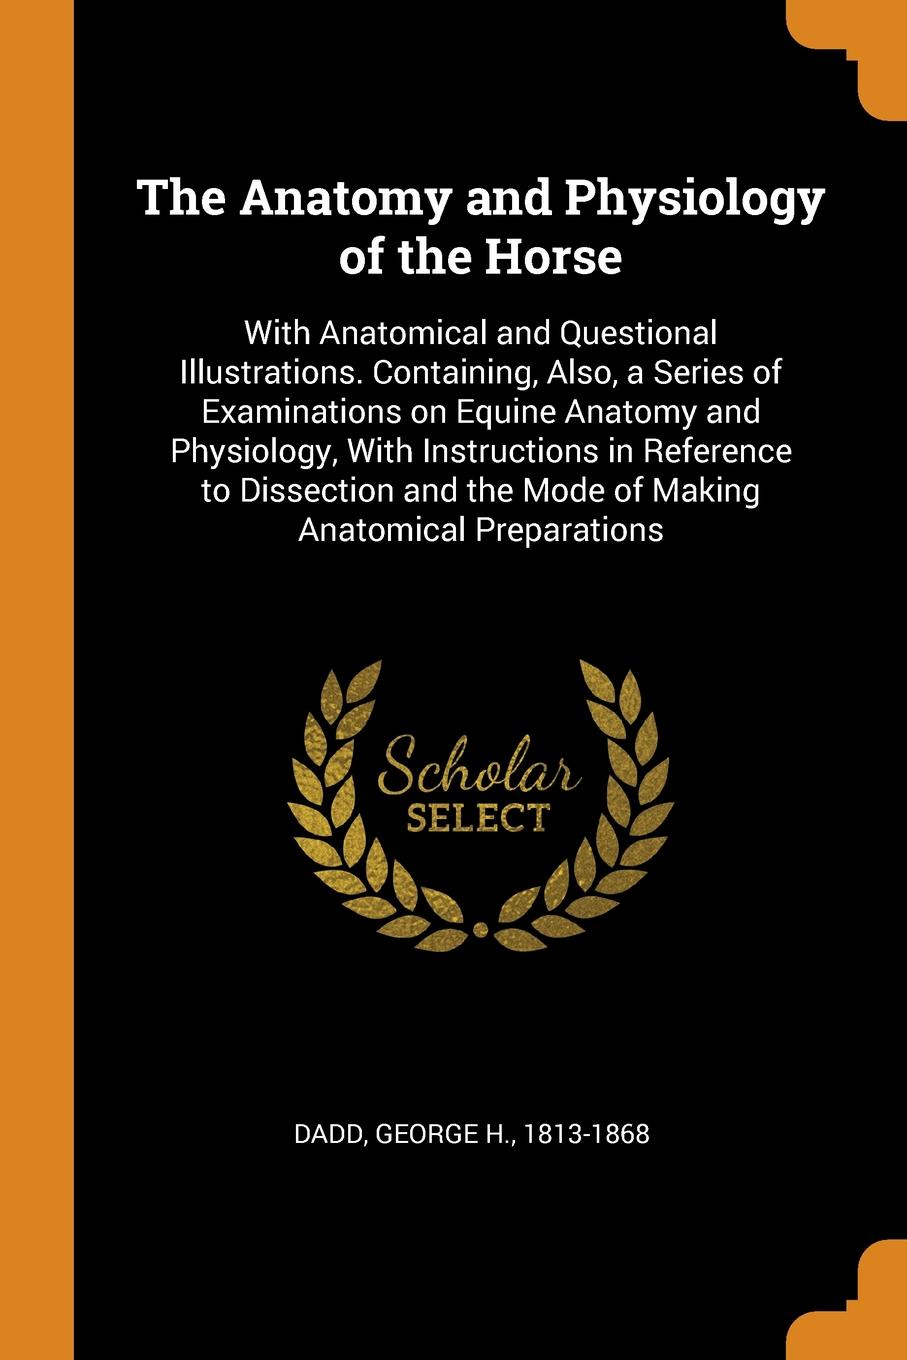 The Anatomy and Physiology of the Horse. With Anatomical and Questional Illustrations. Containing, Also, a Series of Examinations on Equine Anatomy and Physiology, With Instructions in Reference to Dissection and the Mode of Making Anatomical Prep...